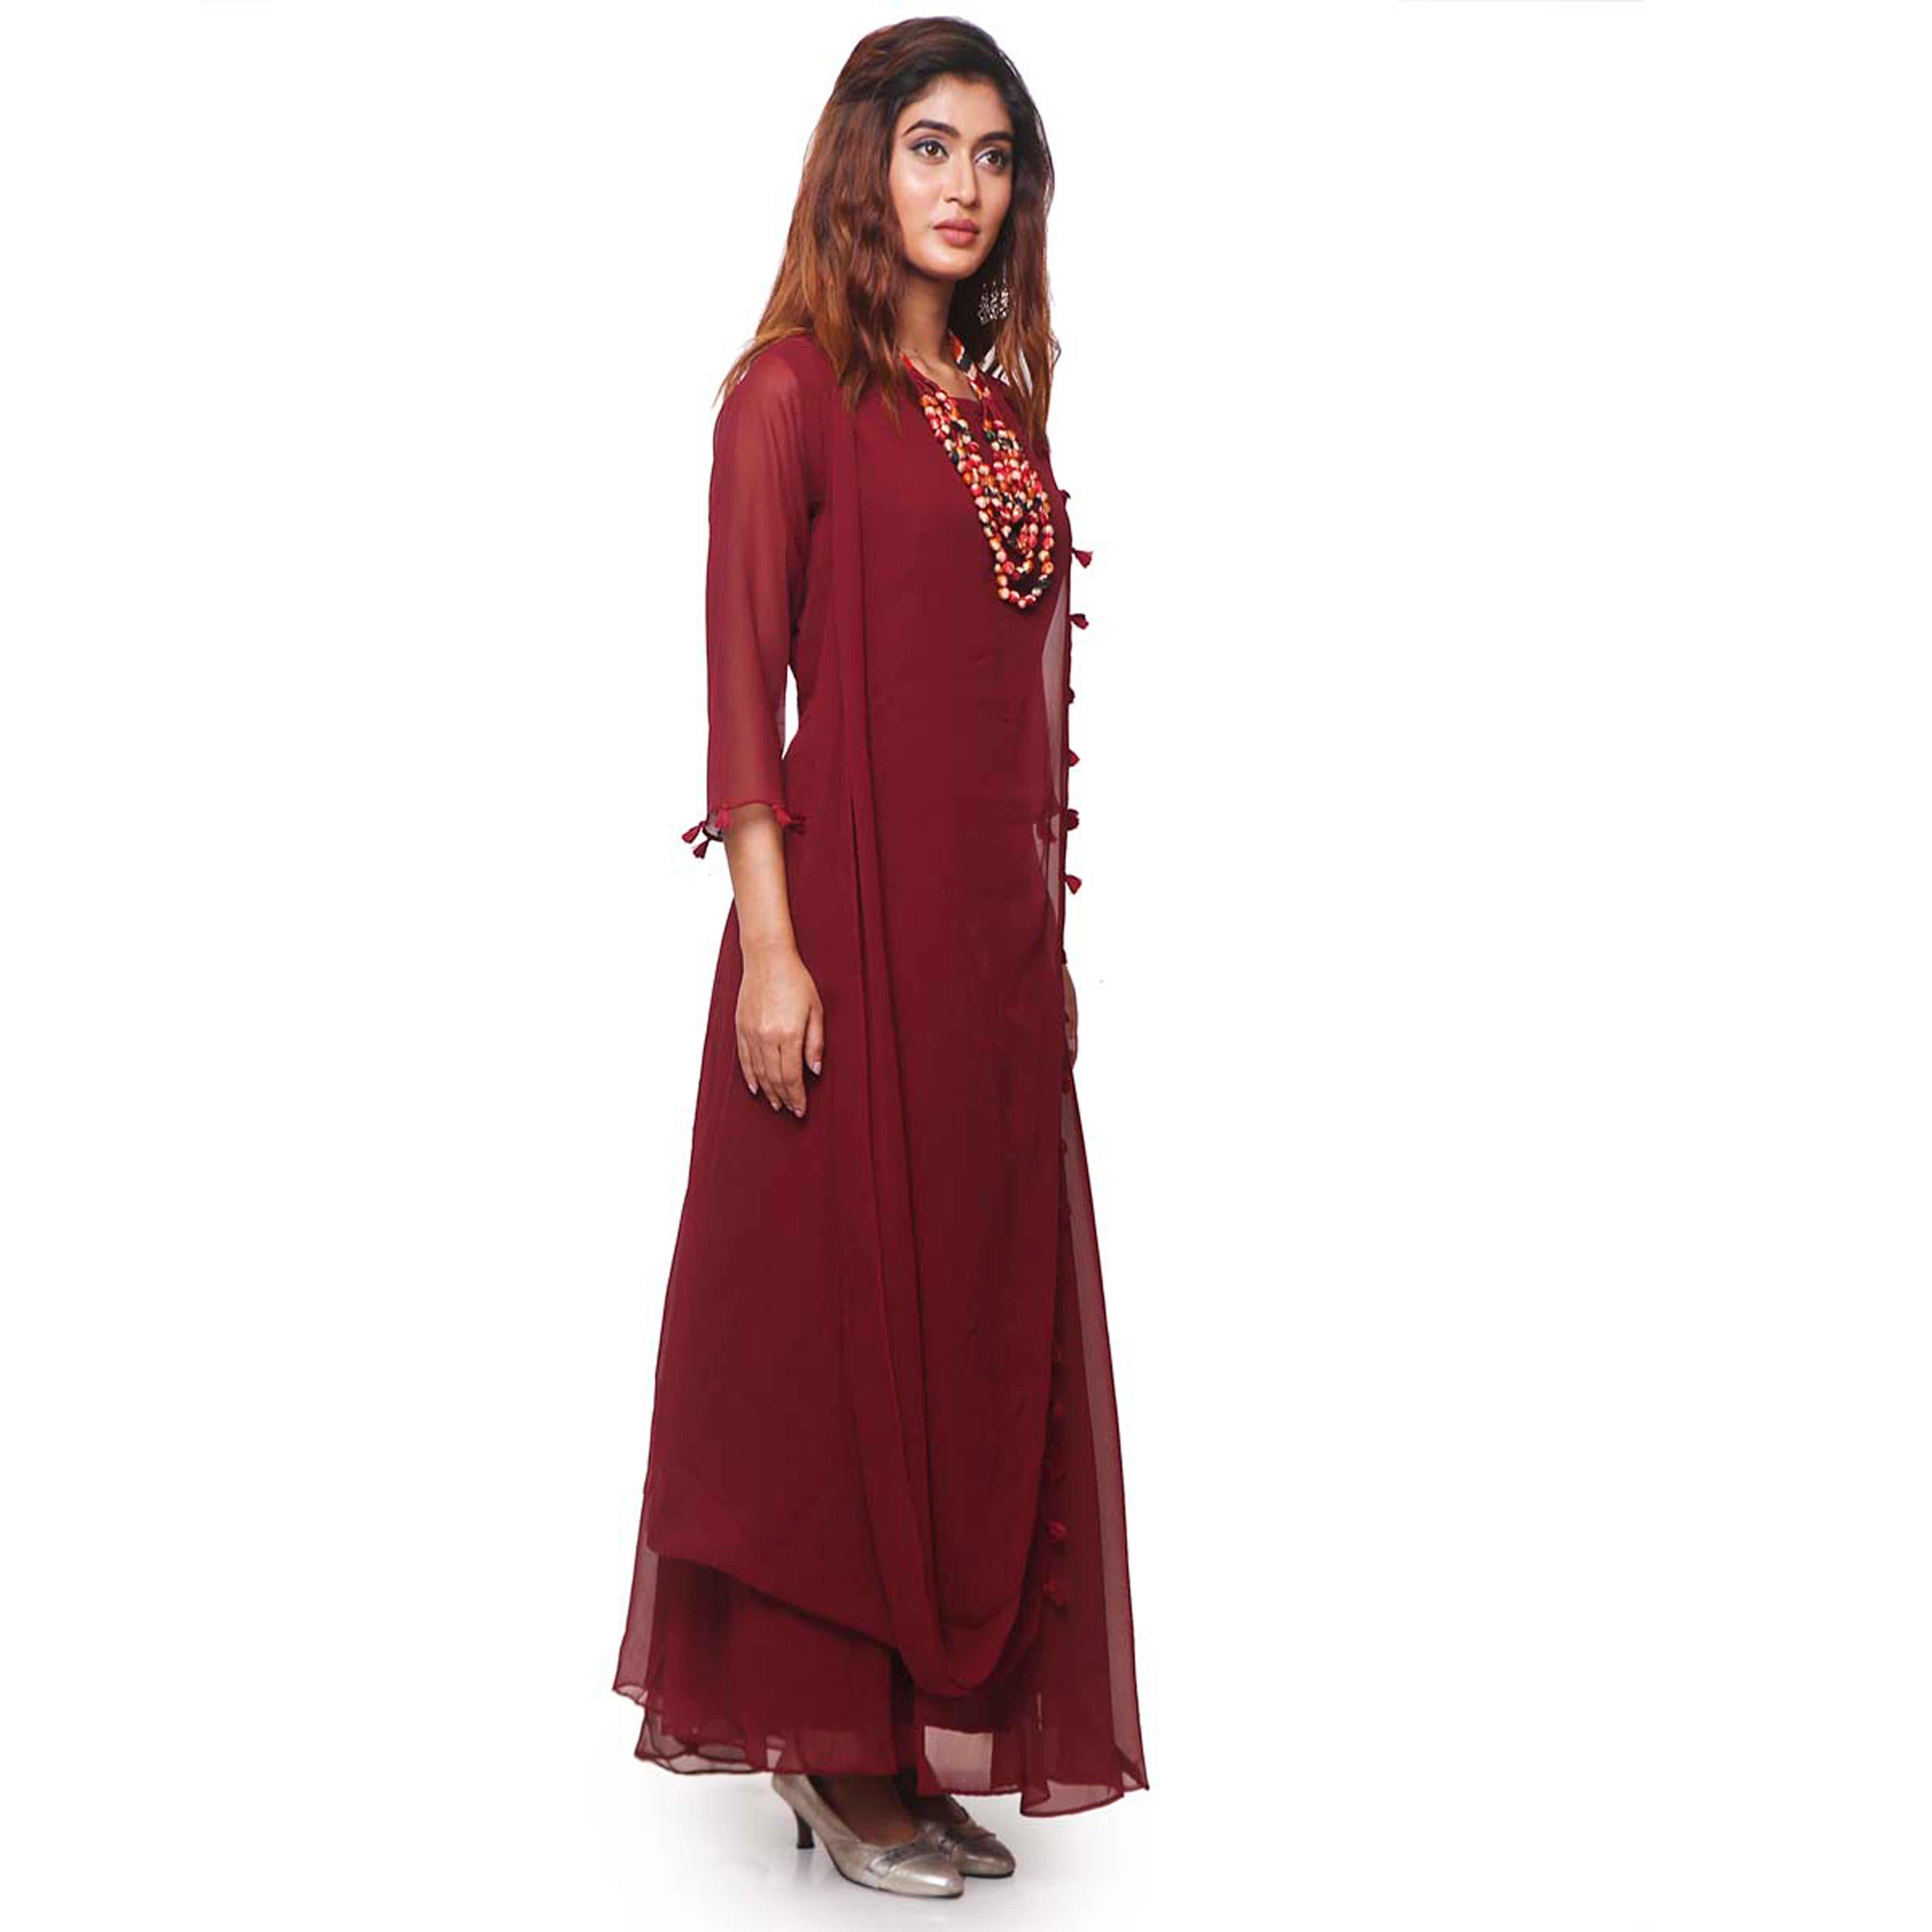 Layered ethnic gown